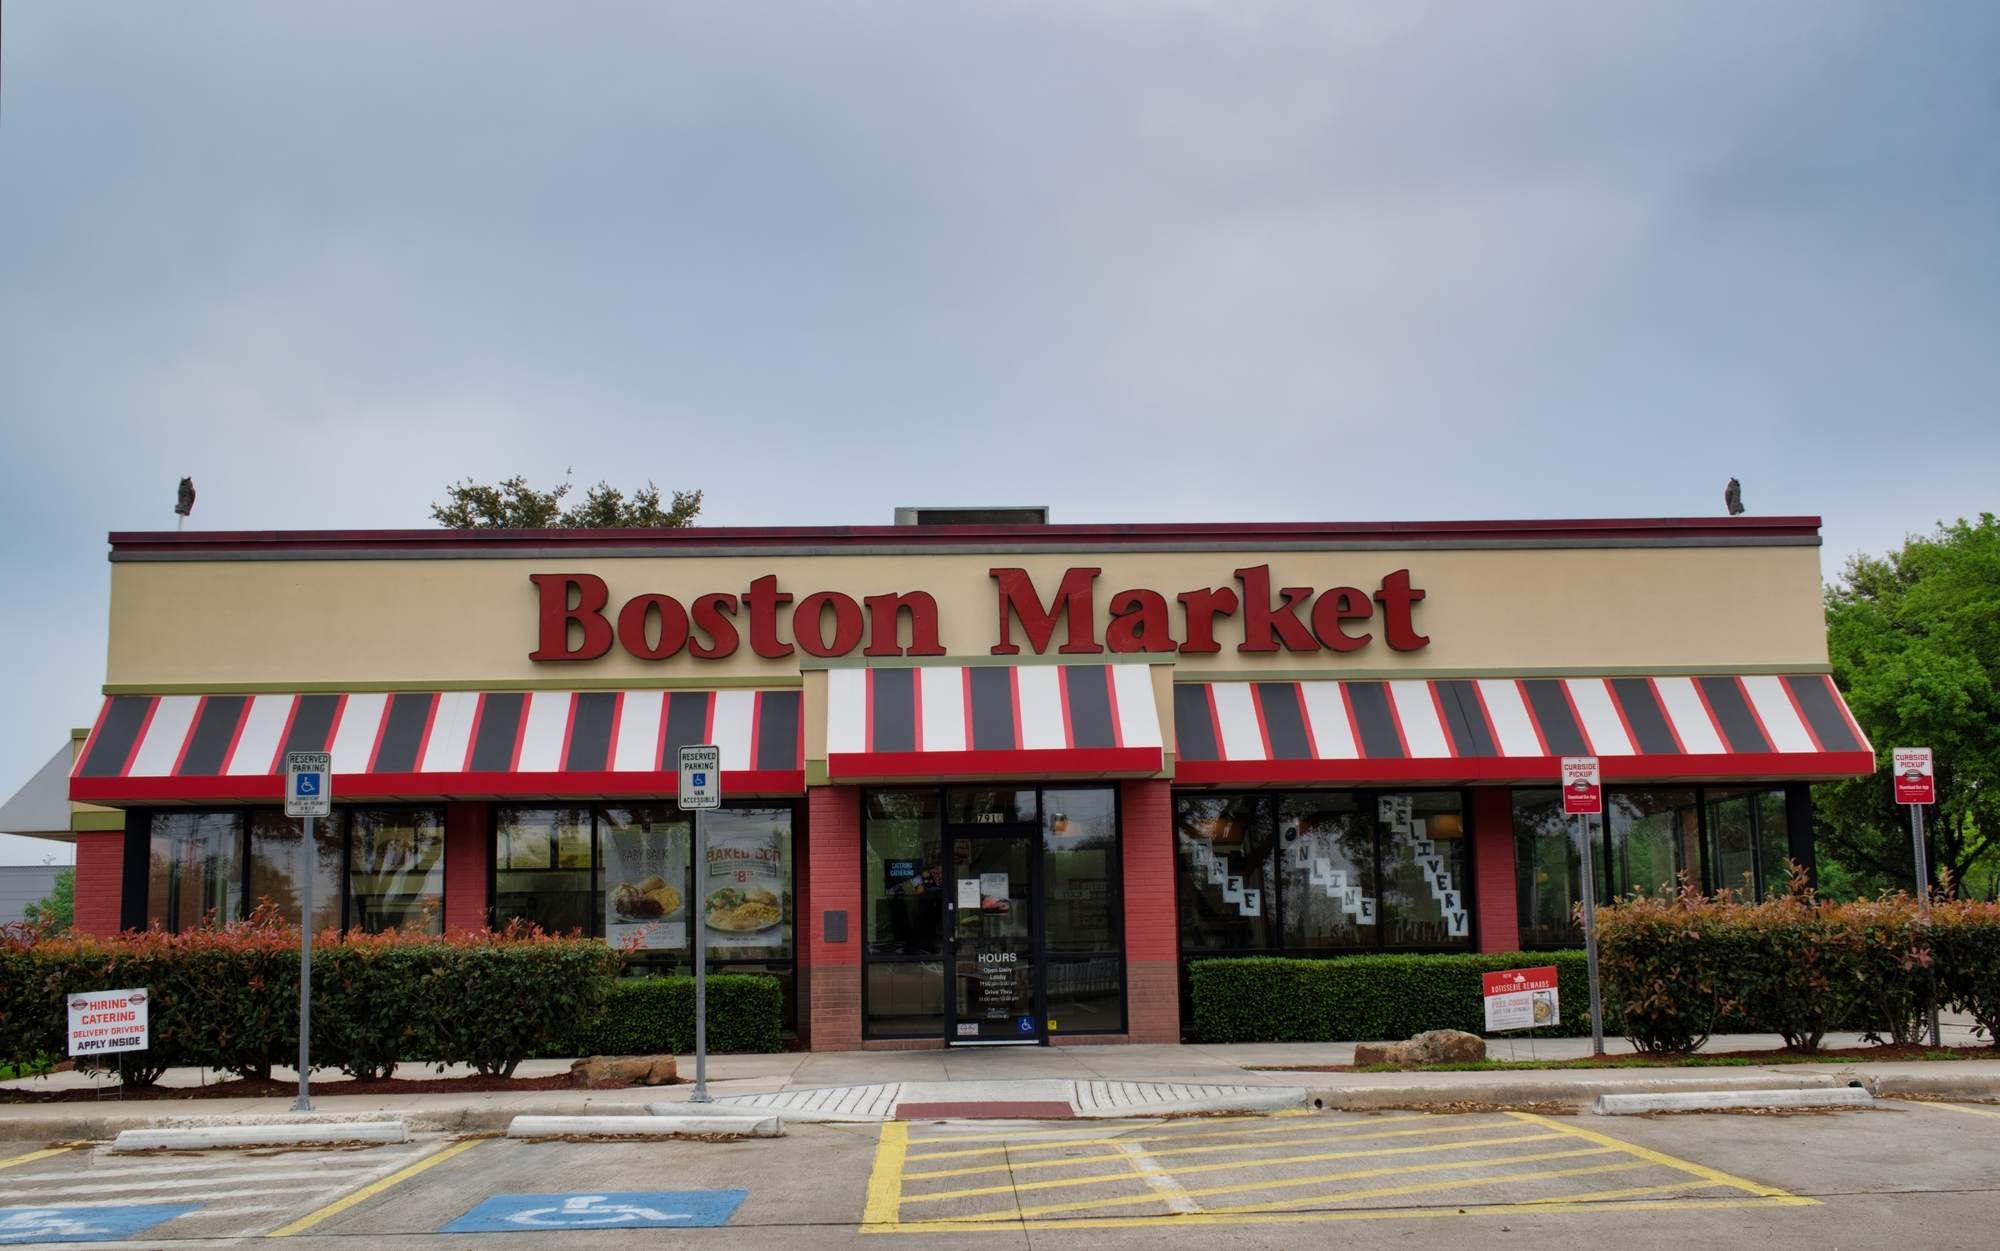 Boston Market is facing a TCPA class action lawsuit.